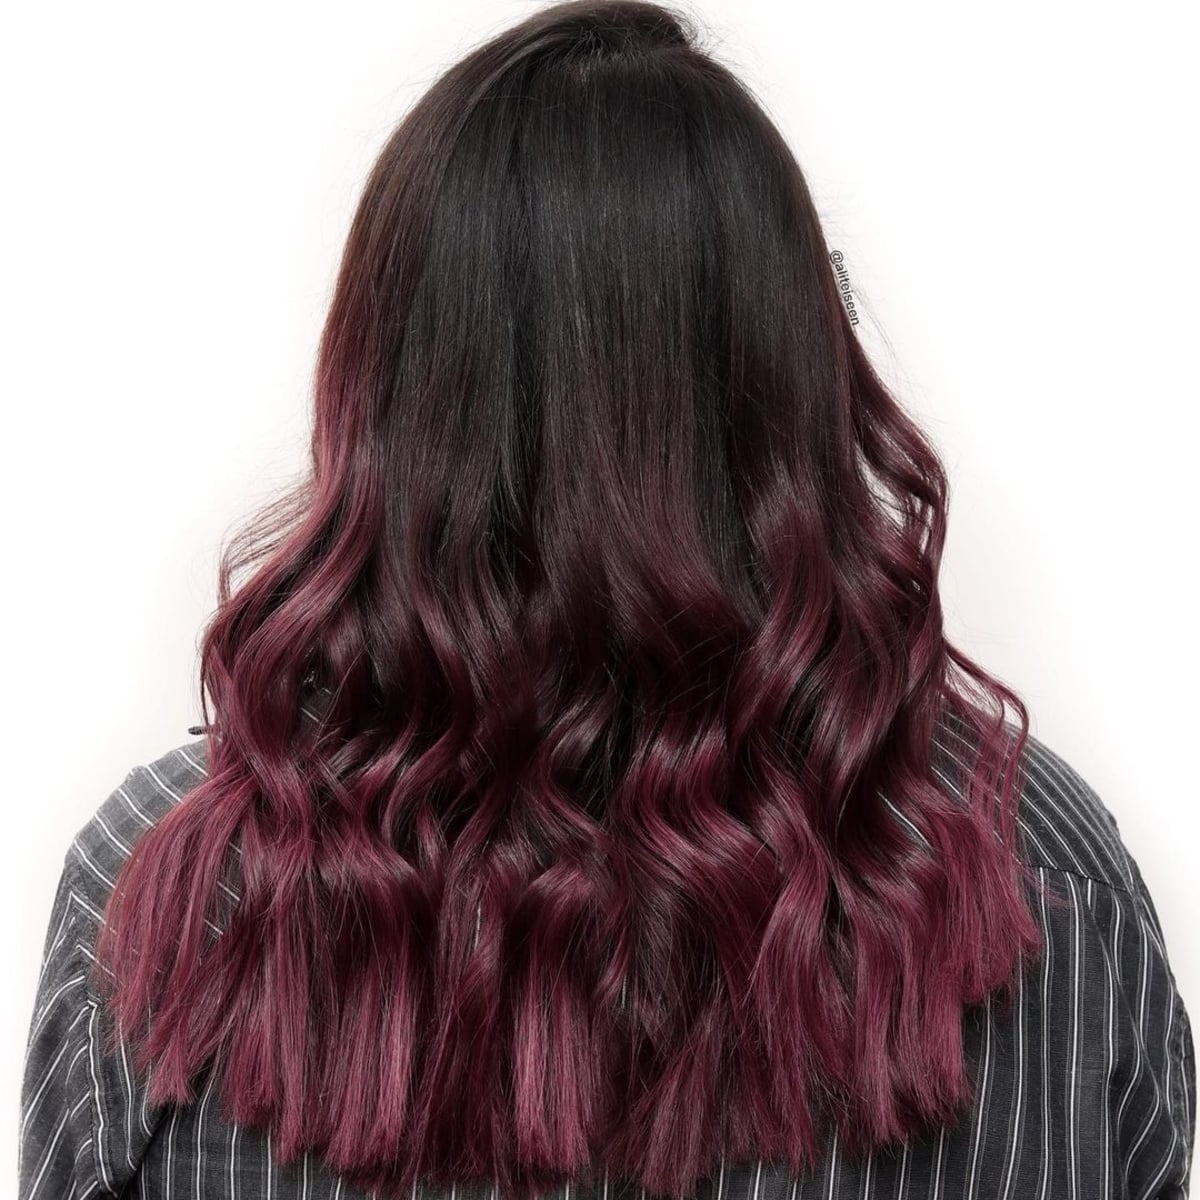 Dark hair with bright cherry ends